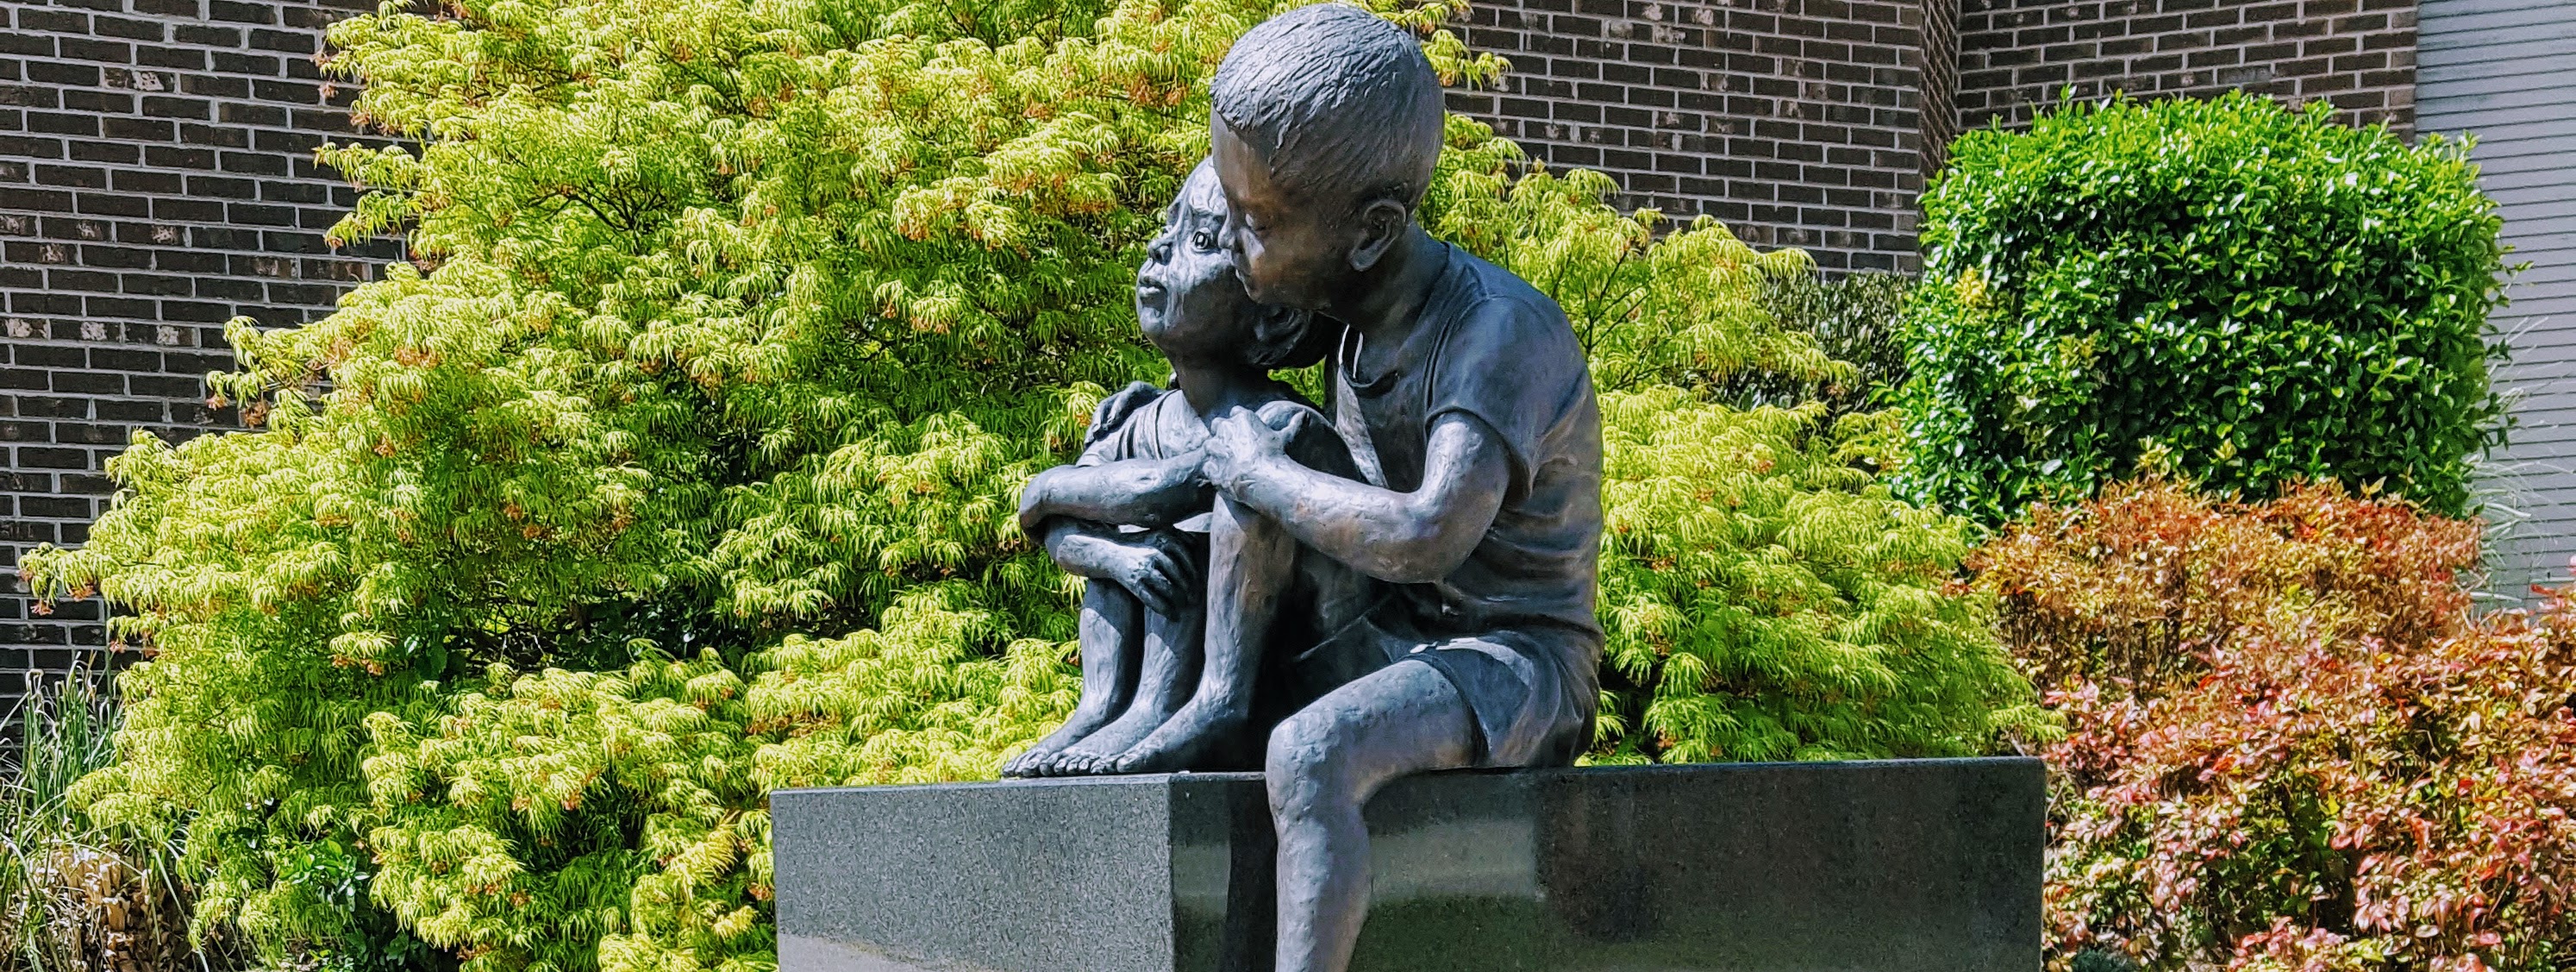 Knox County Juvenile Court child abuse memorial